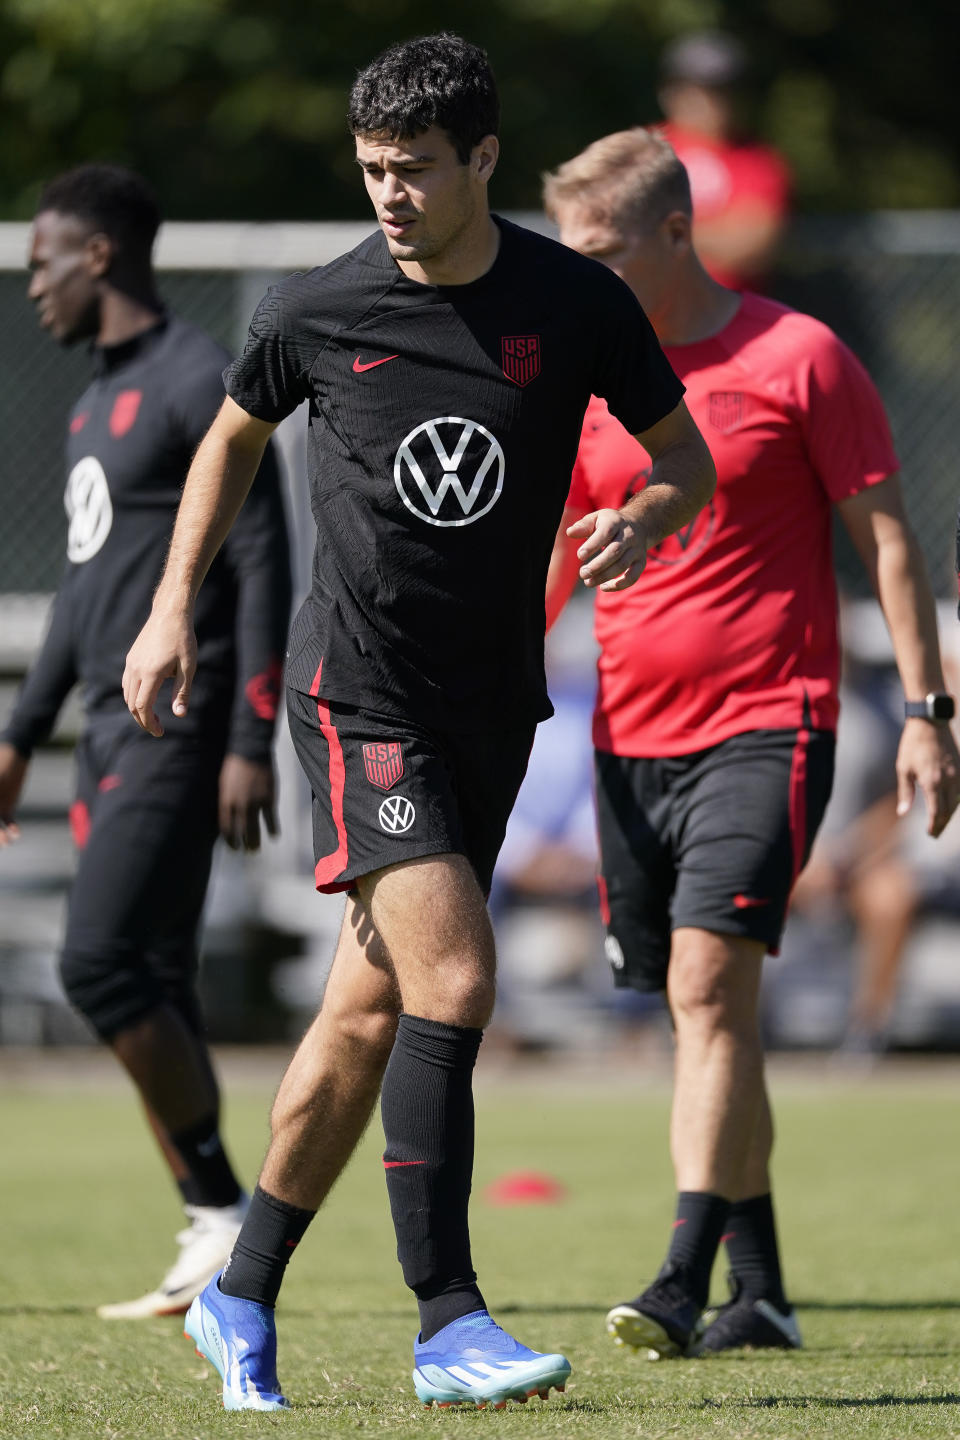 United States midfielder Gio Reyna moves across the field during a soccer training session Tuesday, Oct. 10, 2023, in Brentwood, Tenn. (AP Photo/George Walker IV)